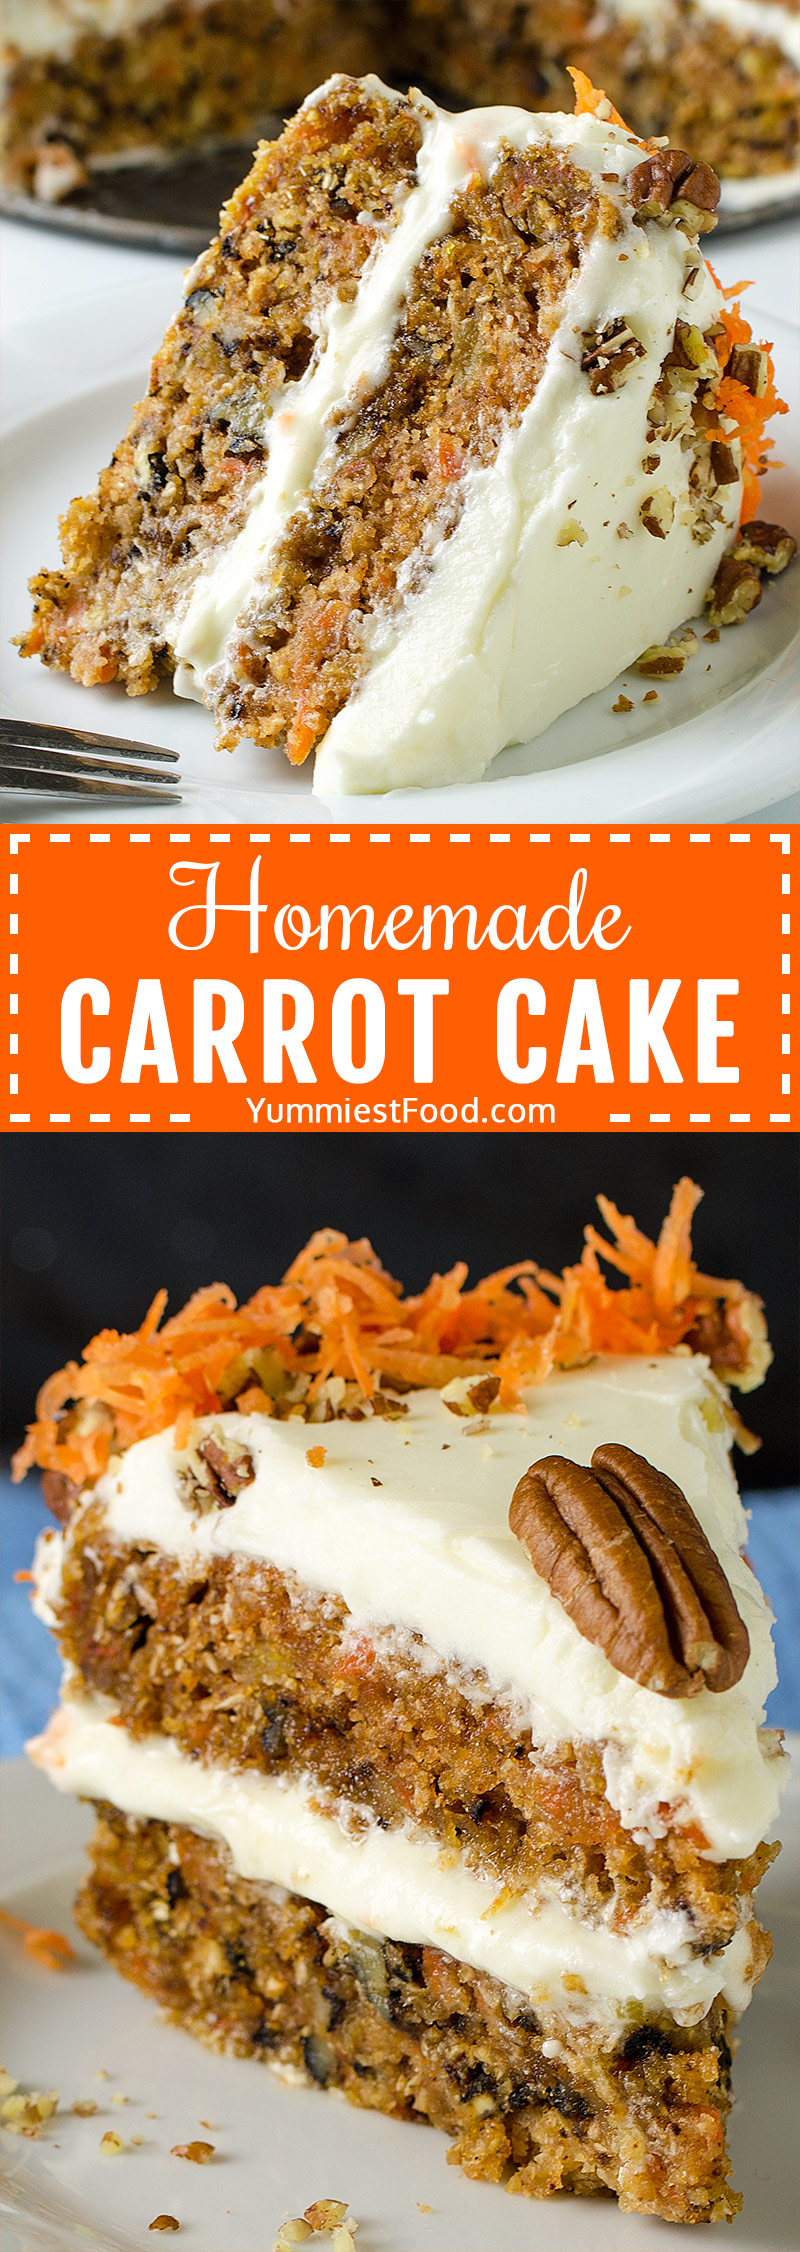 HOMEMADE CARROT CAKE – This easy Carrot cake recipe is rich, moist and delicious